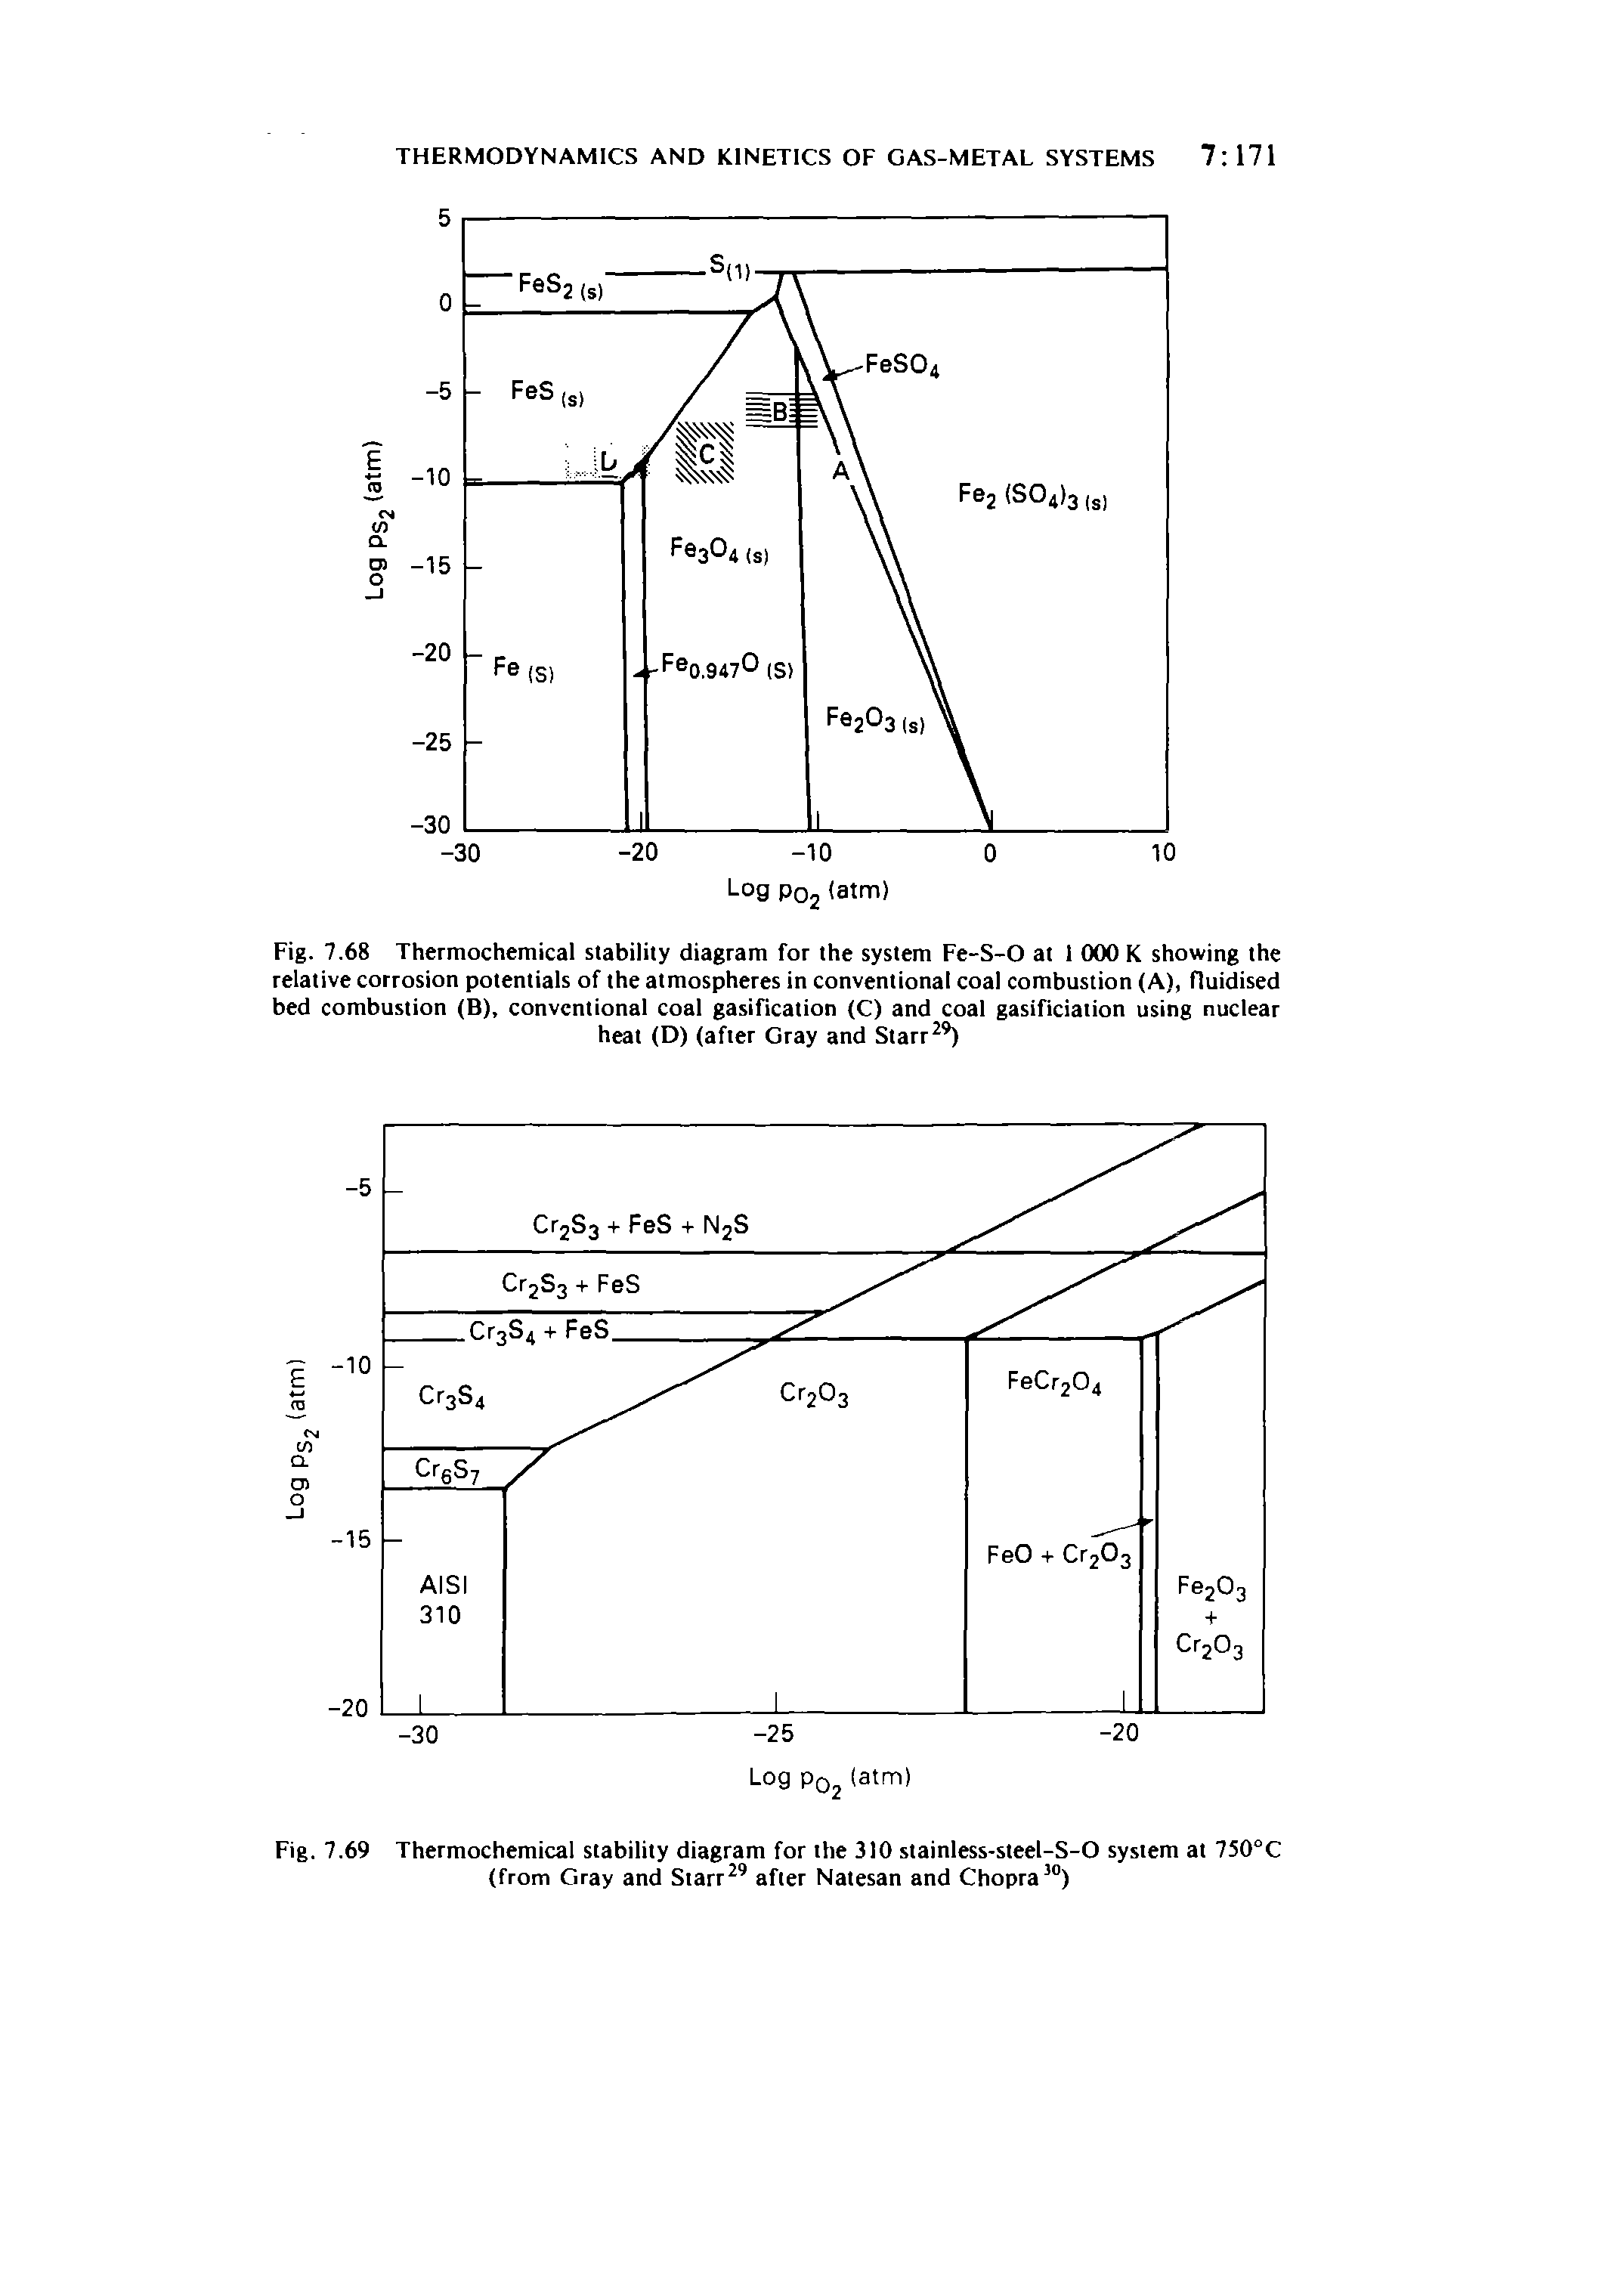 Fig. 7.68 Thermochemical stability diagram for the system Fe-S-O at I 000 K showing the relative corrosion potentials of the atmospheres in conventional coal combustion (A), fluidised bed combustion (B), conventional coal gasification (C) and coal gasificiation using nuclear heat (D) (after Gray and Starr )...